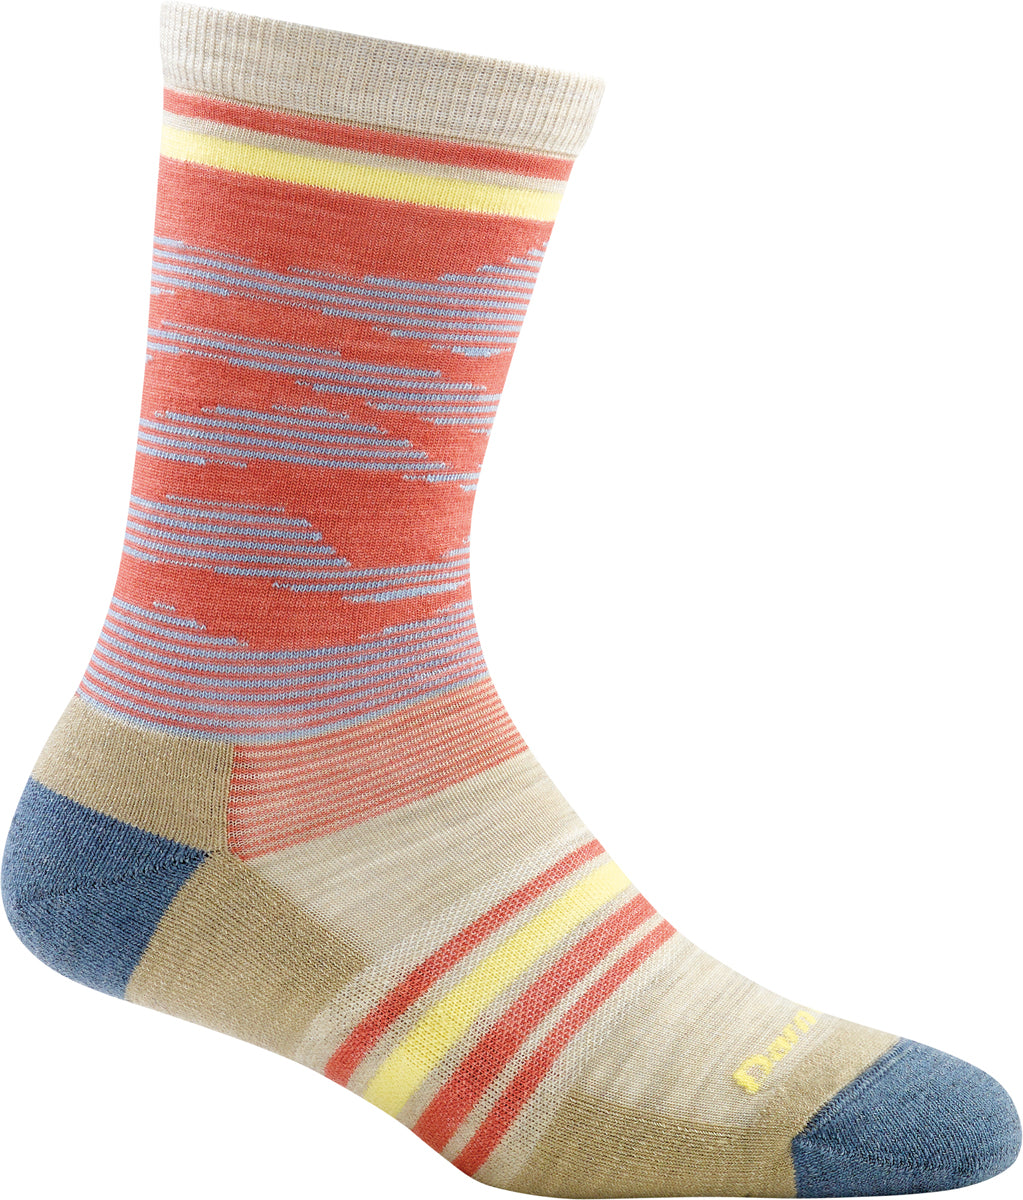 Women's Darn Tough Waves Crew Light Cushion Sock in Canyon from the side view